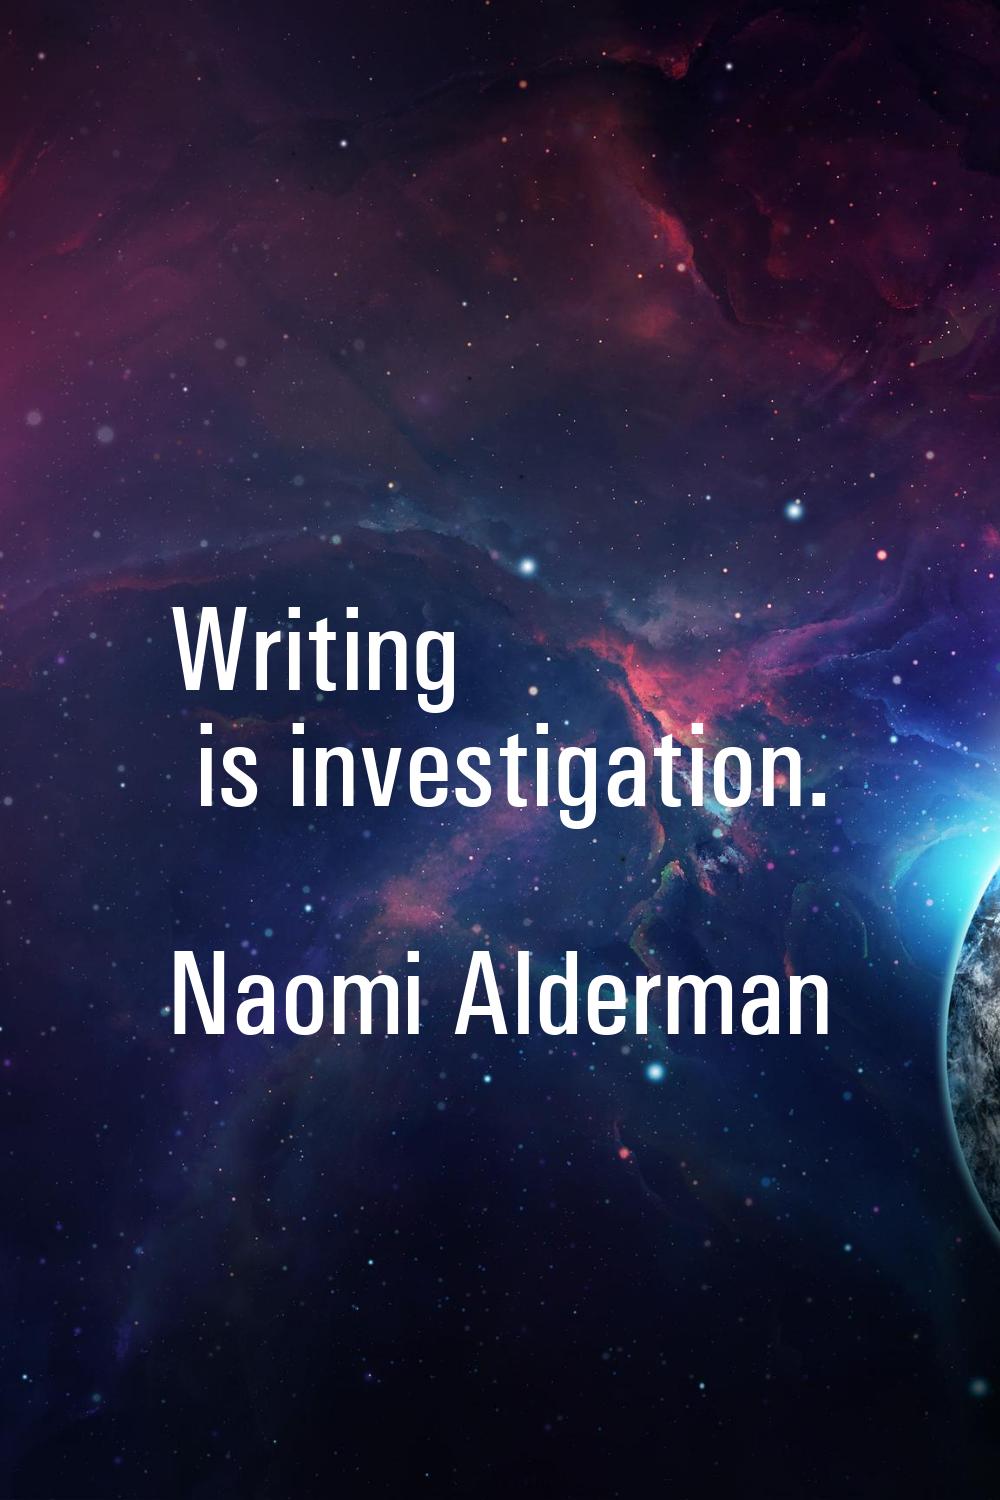 Writing is investigation.